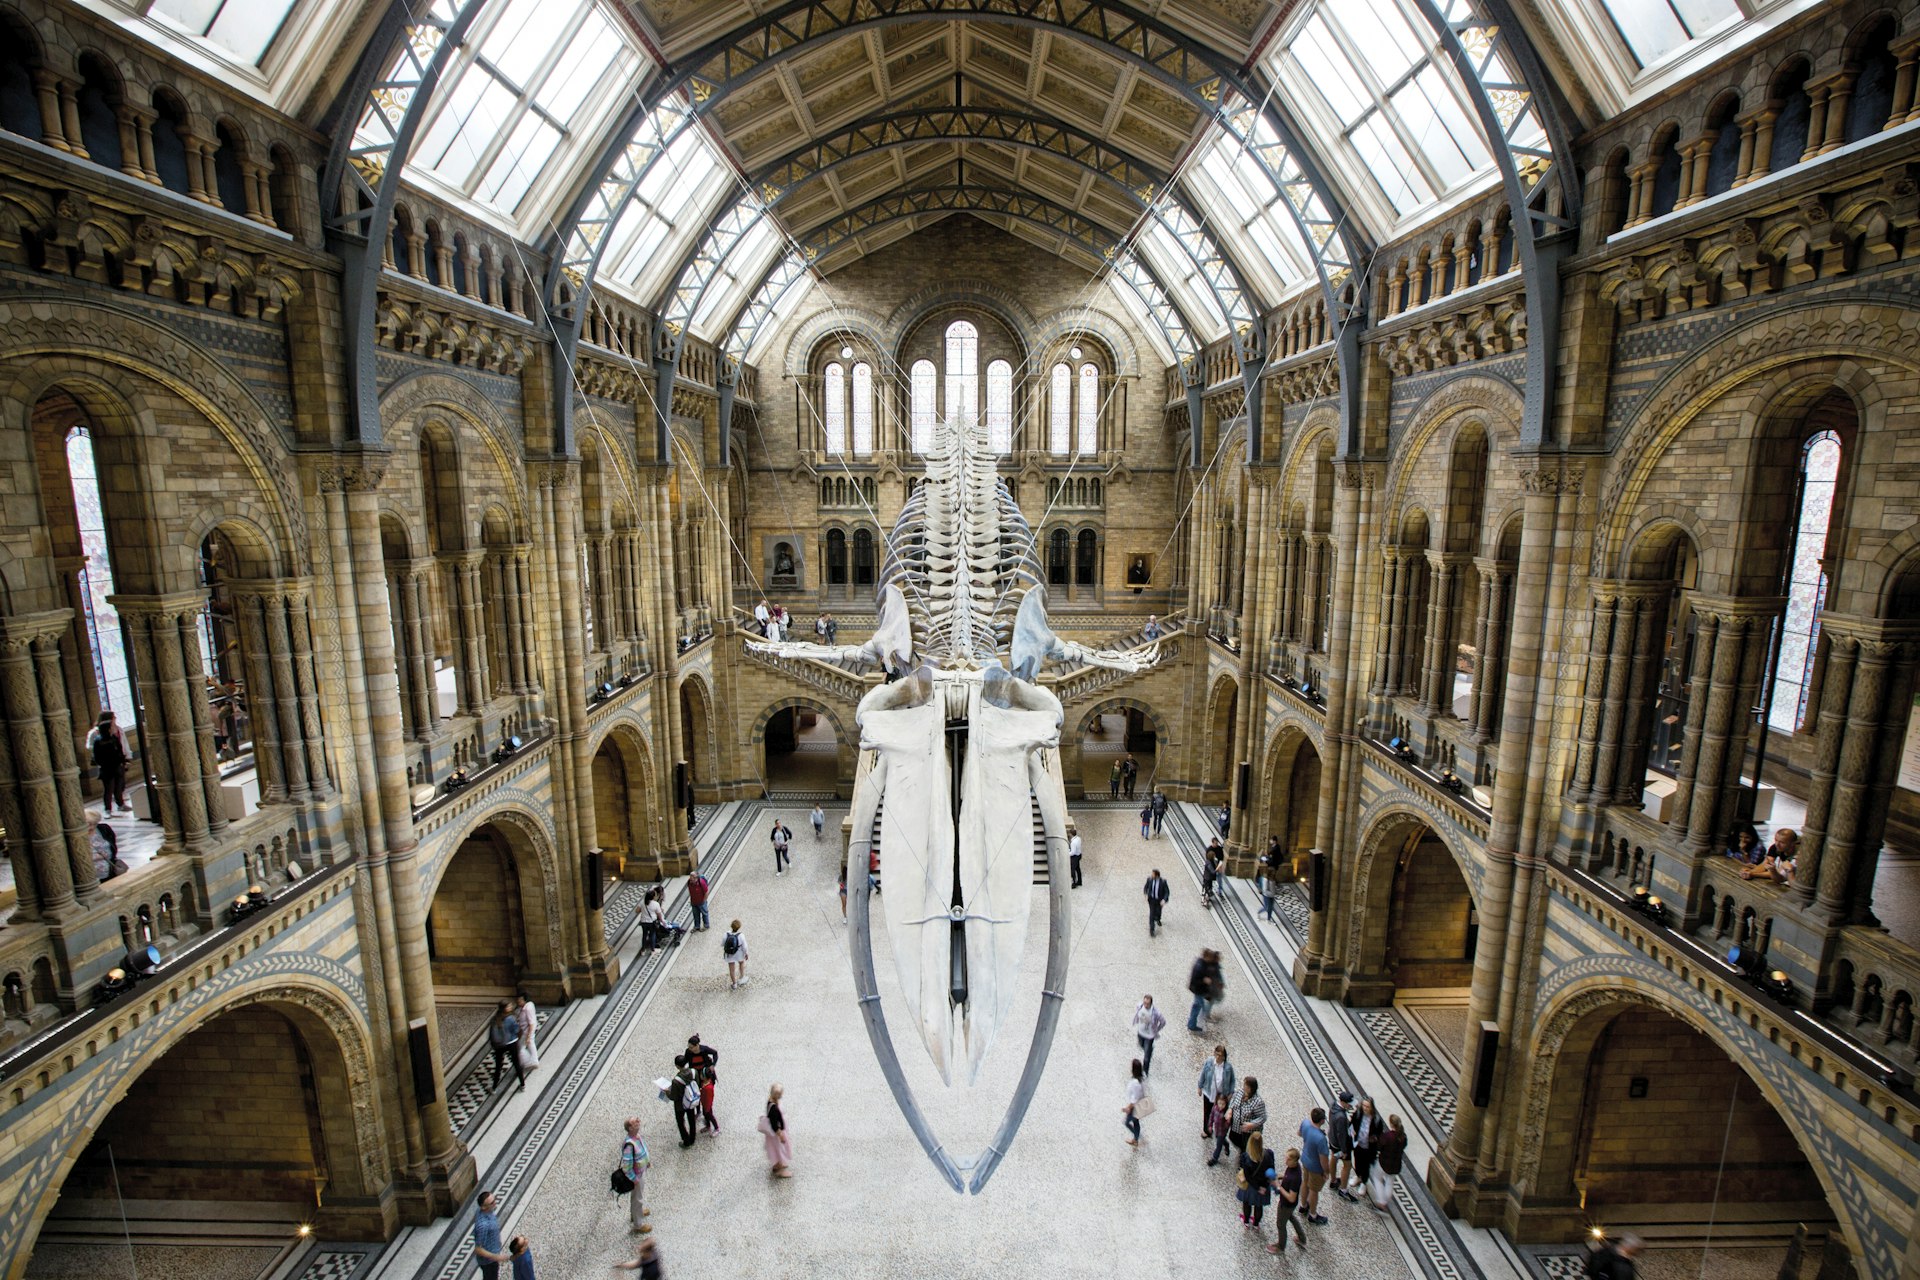 A shot down into the main hall of a huge museum. From the ceiling hangs a blue whale skeleton